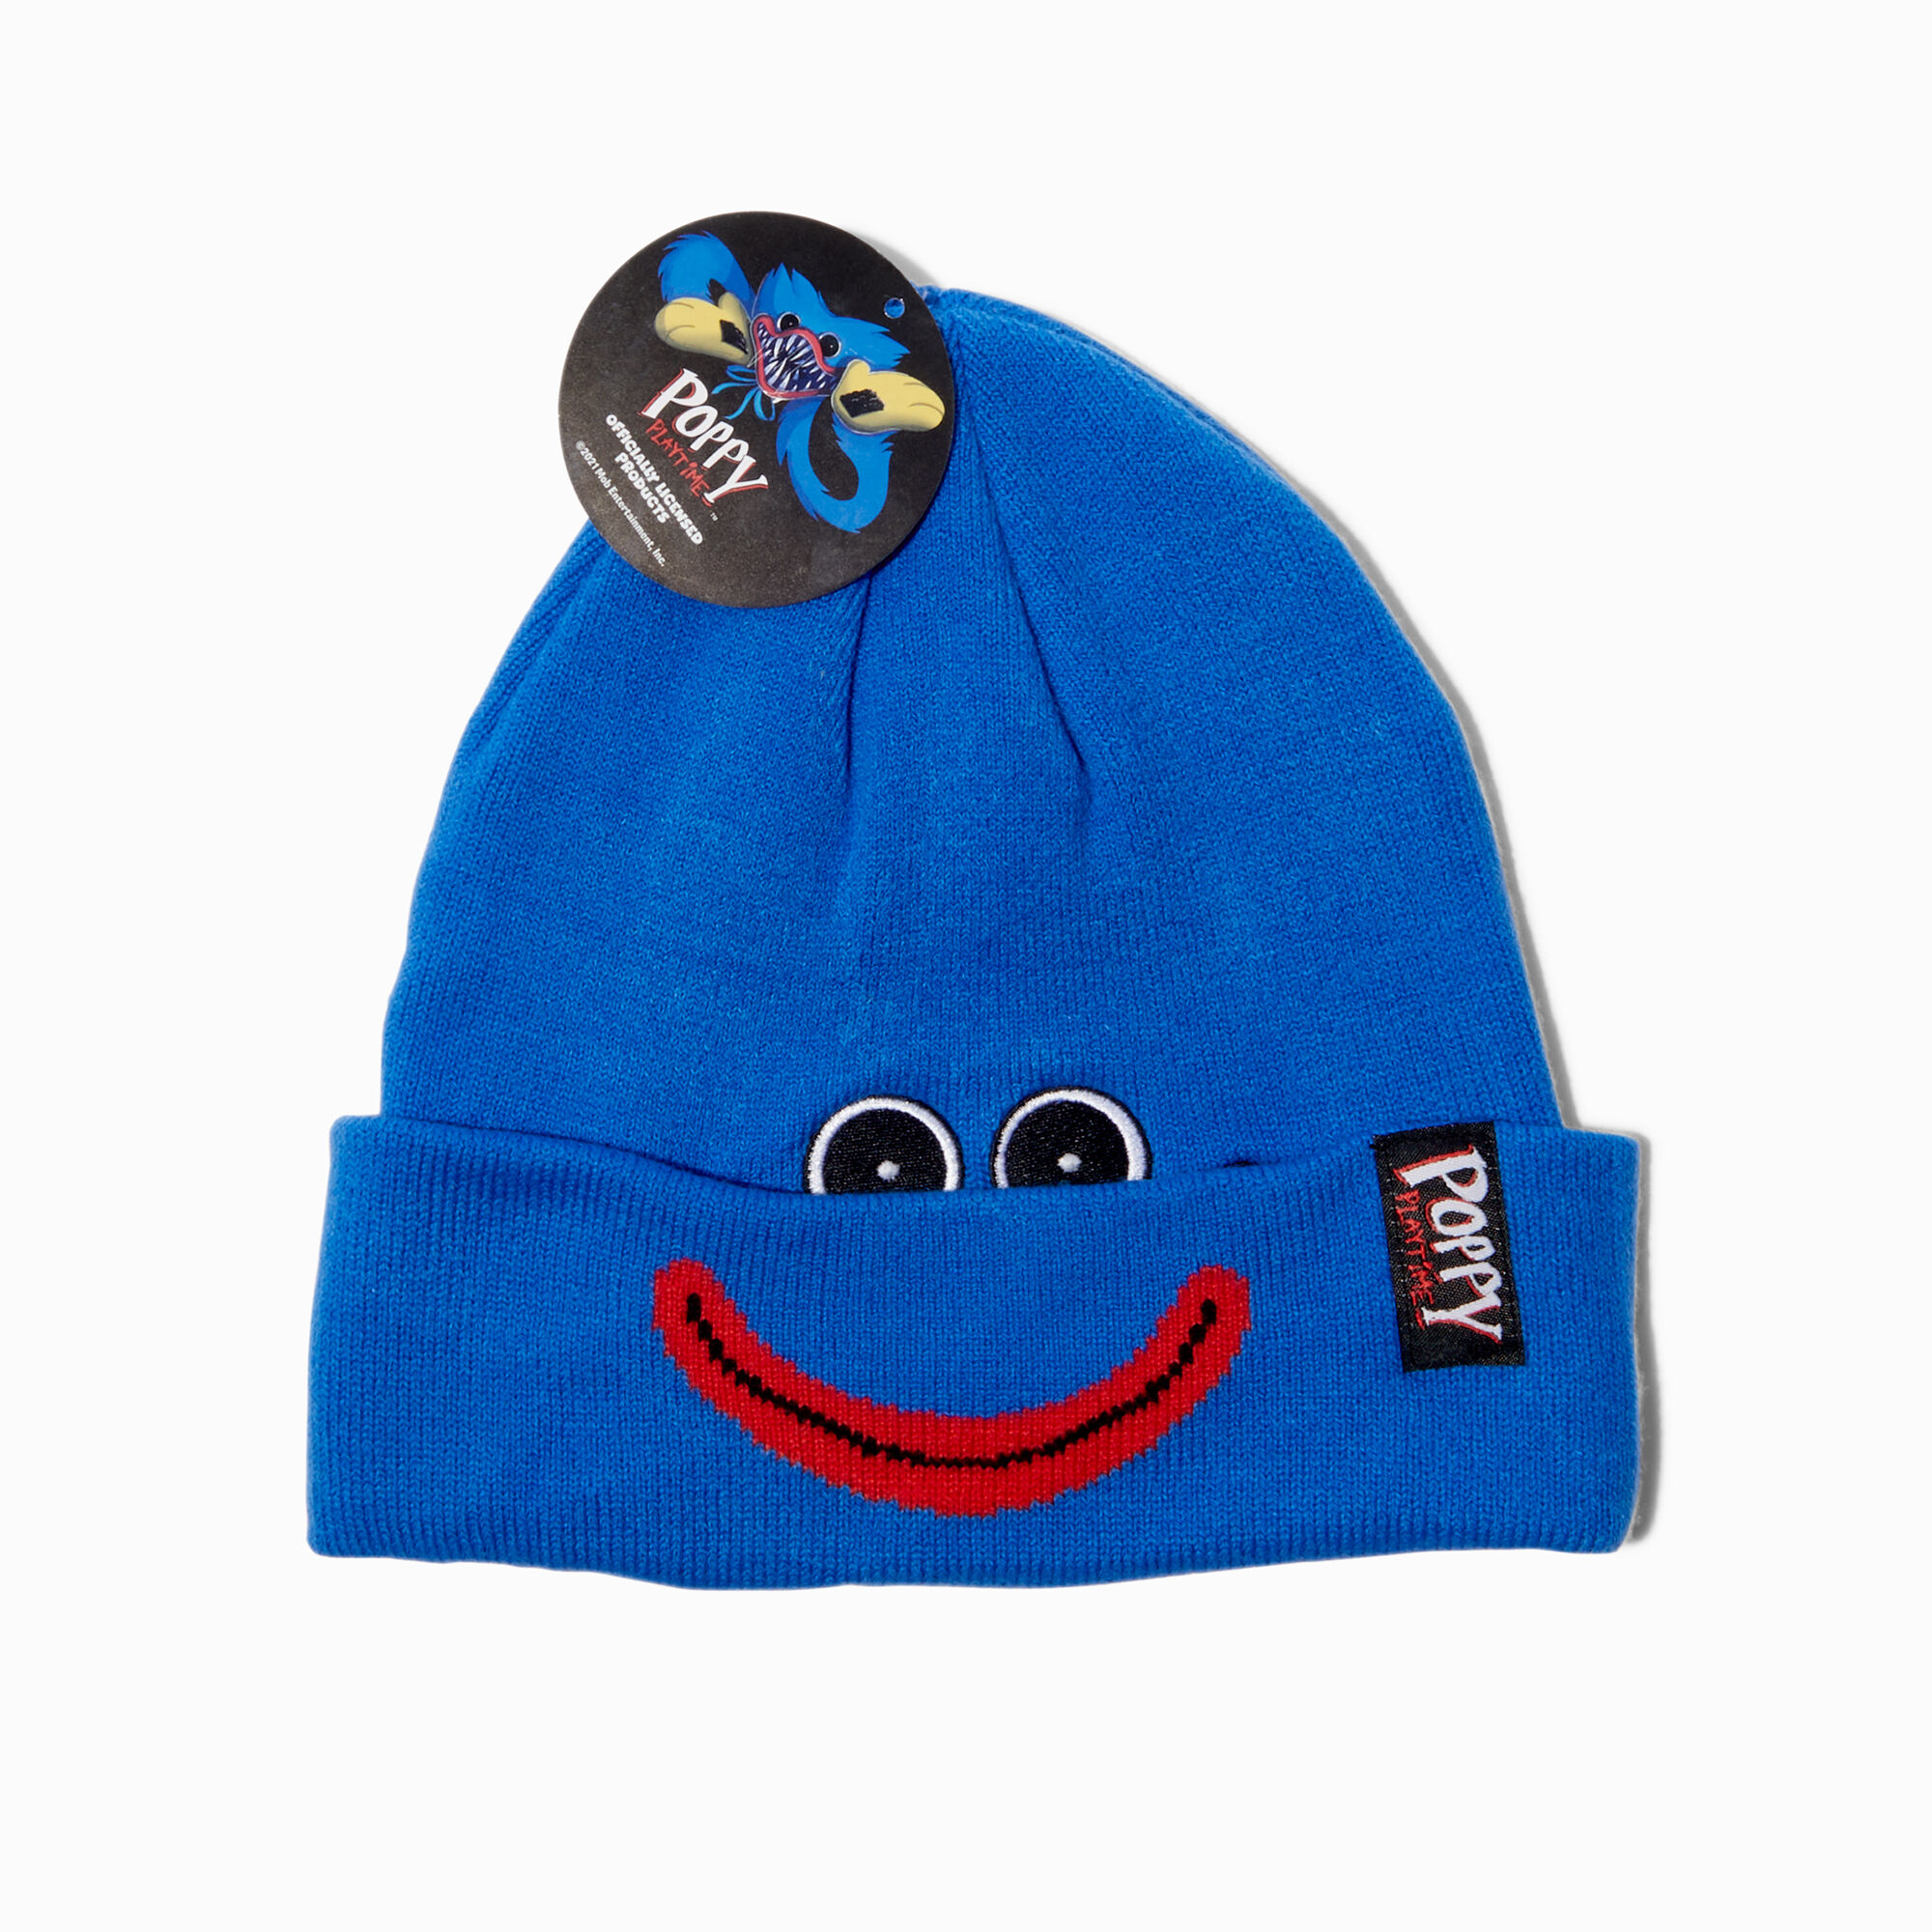 View Claires Poppys Playtime Beanie information